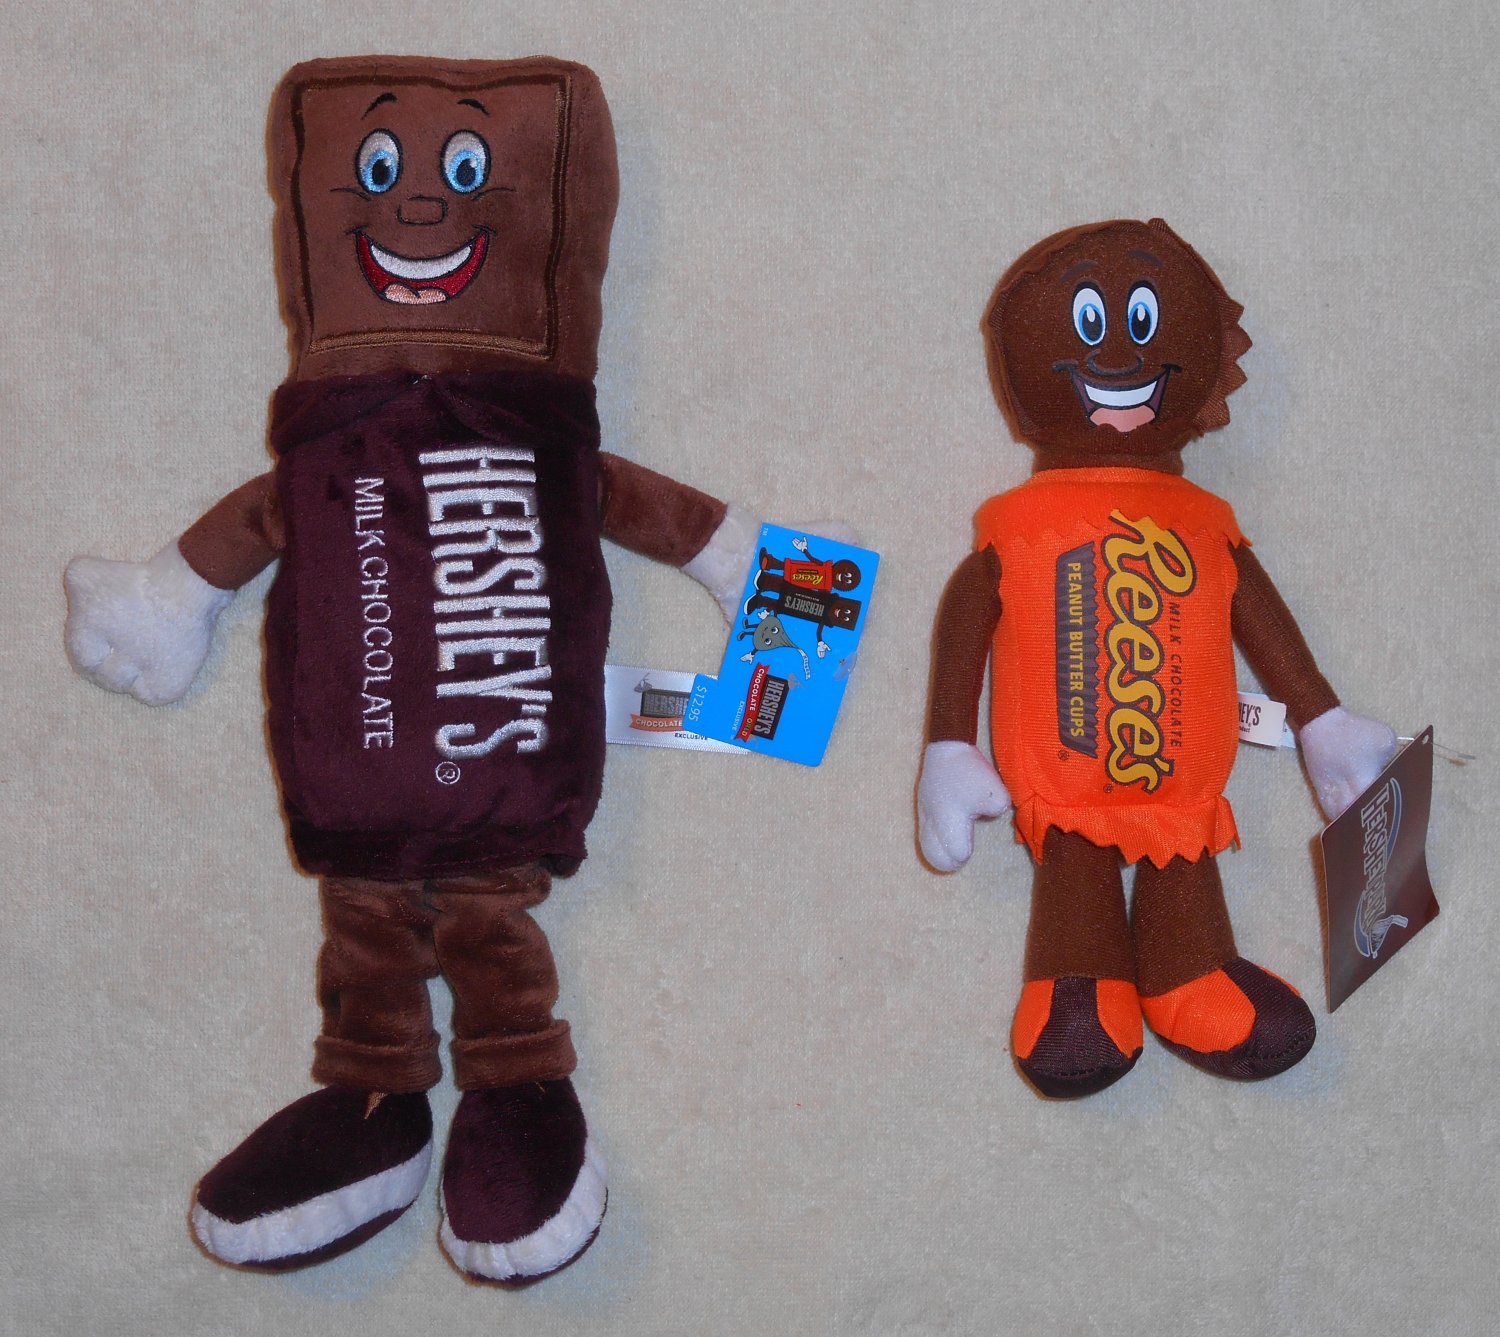 Hershey's Chocolate Lot Plush Pencils Note Pads Reese's Peanut Butter Cup Charms Earrings Ornament